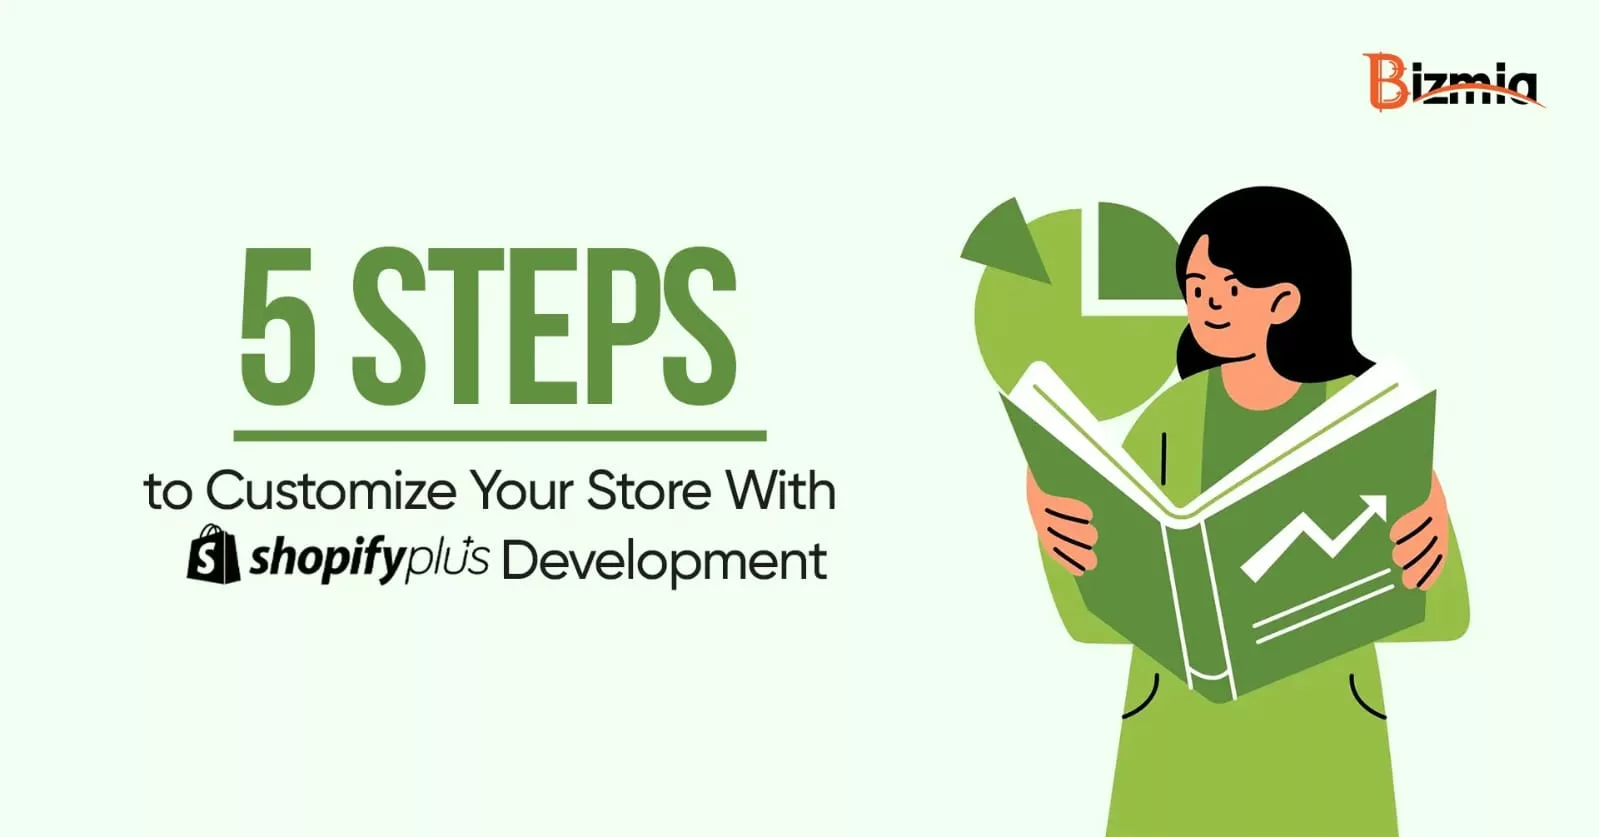 5 Steps to Customize Your Store With Shopify Plus Development